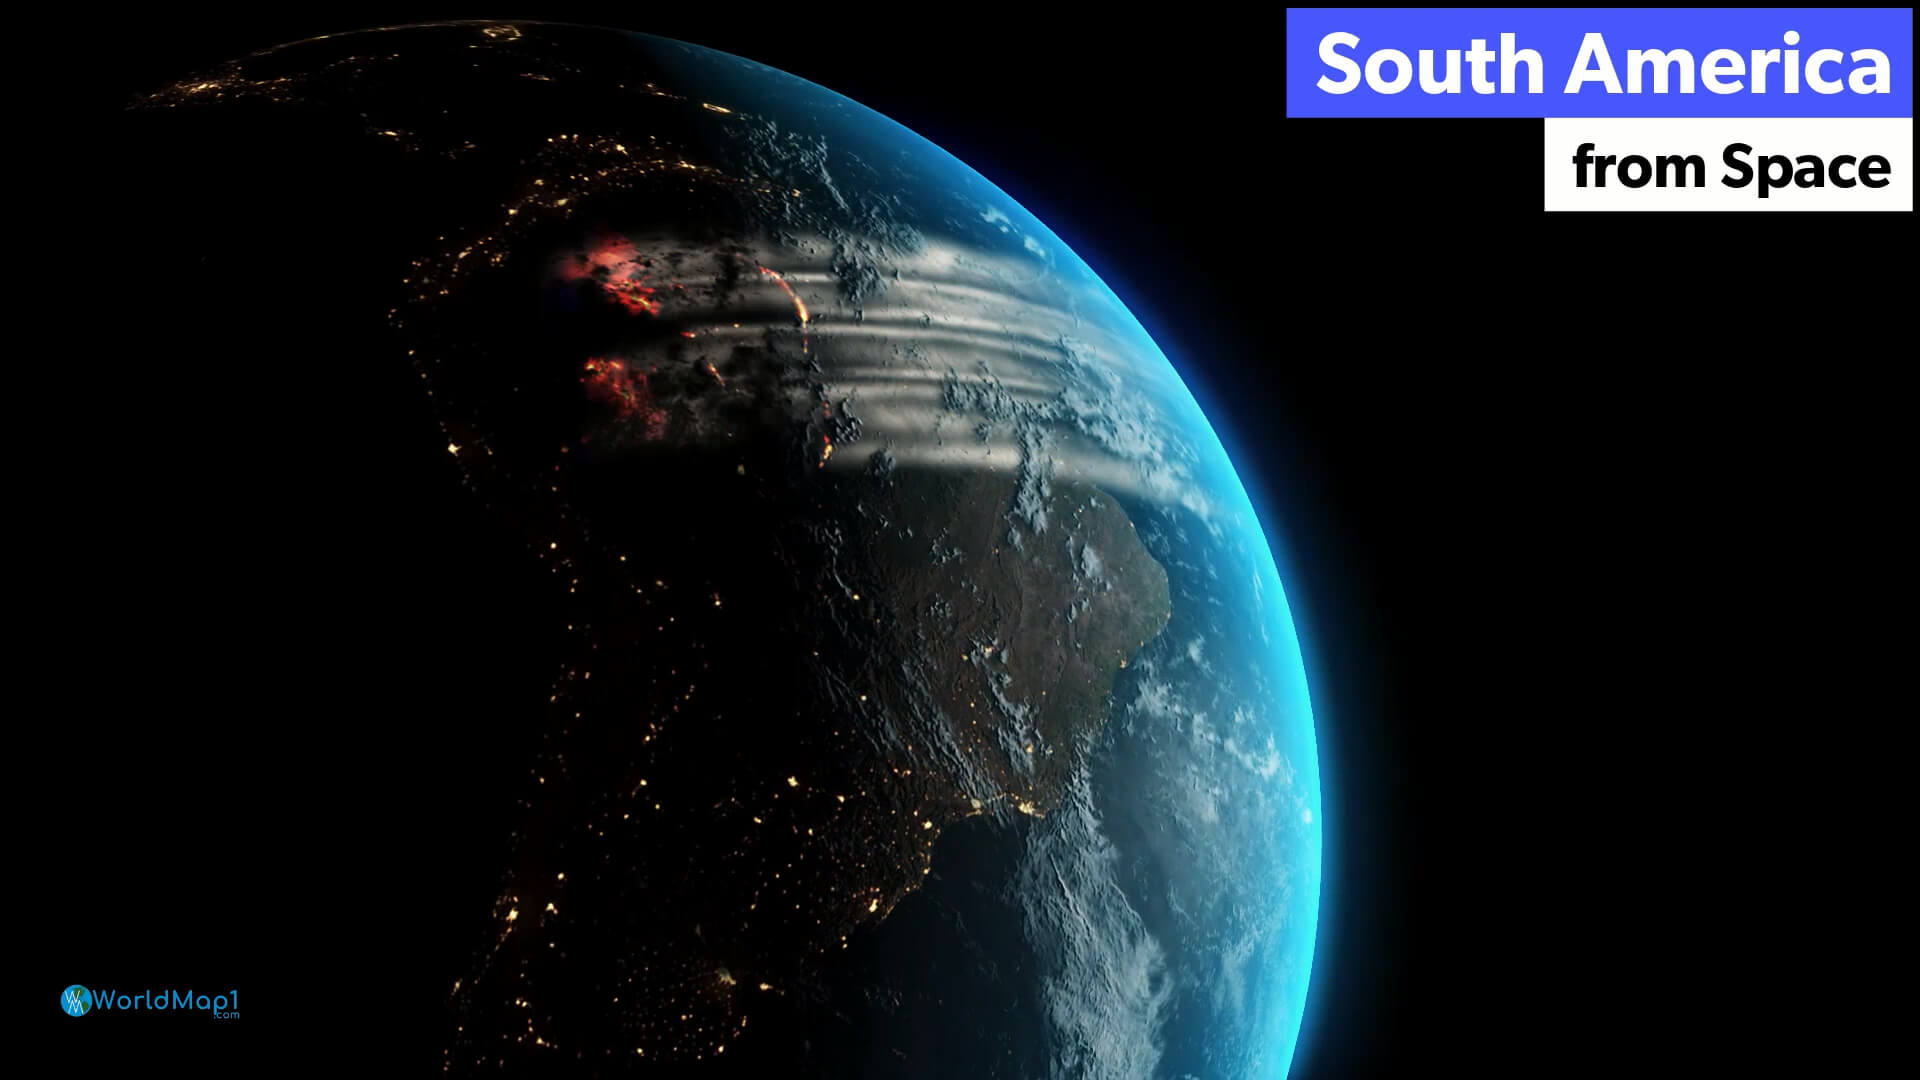 South America from Space